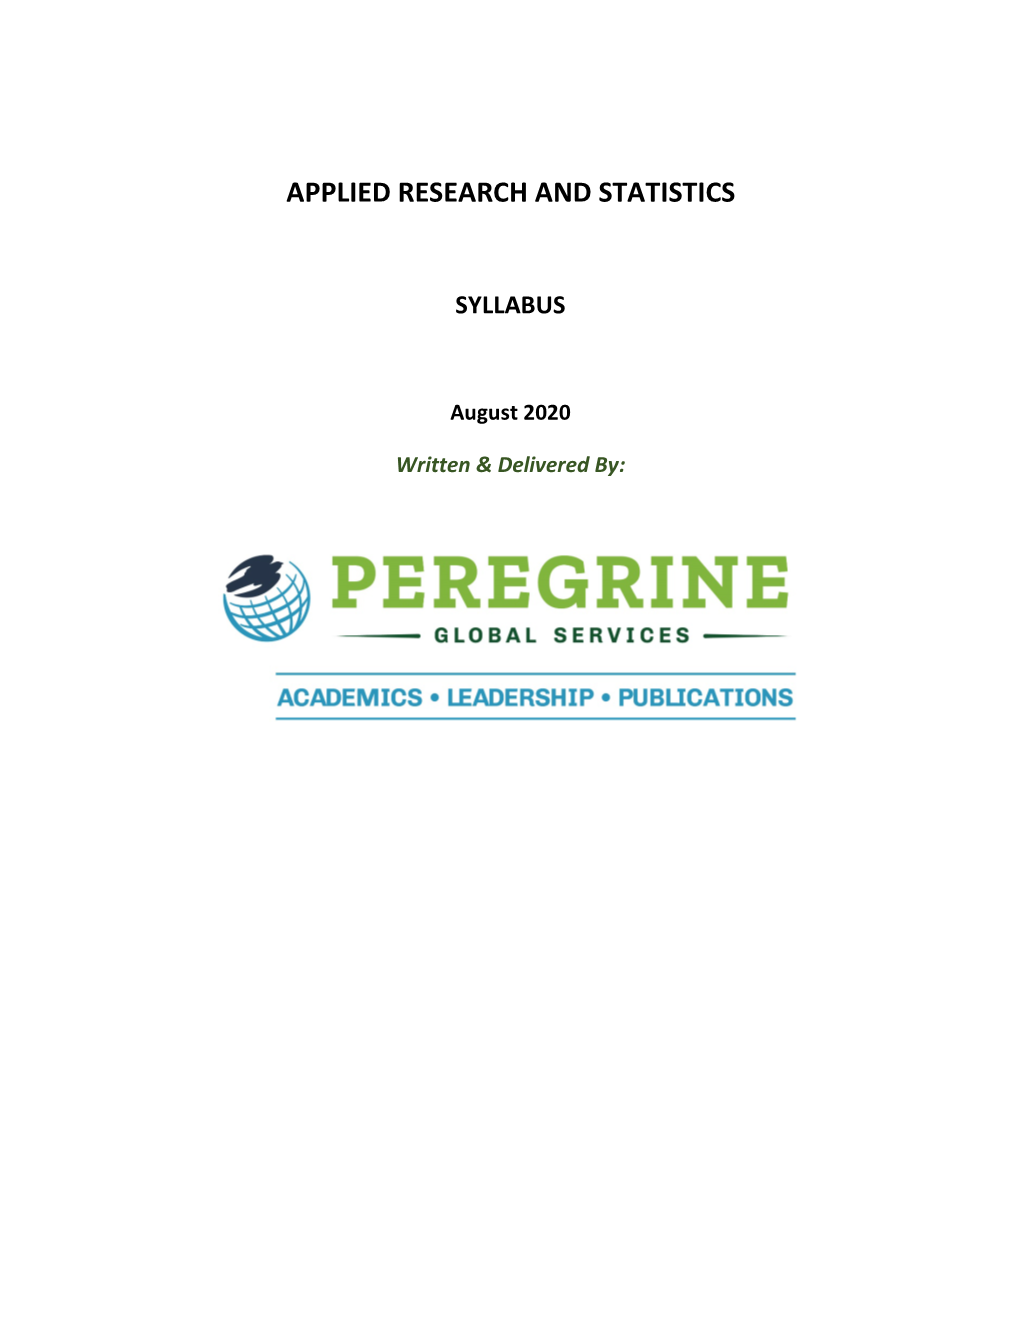 Applied Research and Statistics Syllabus